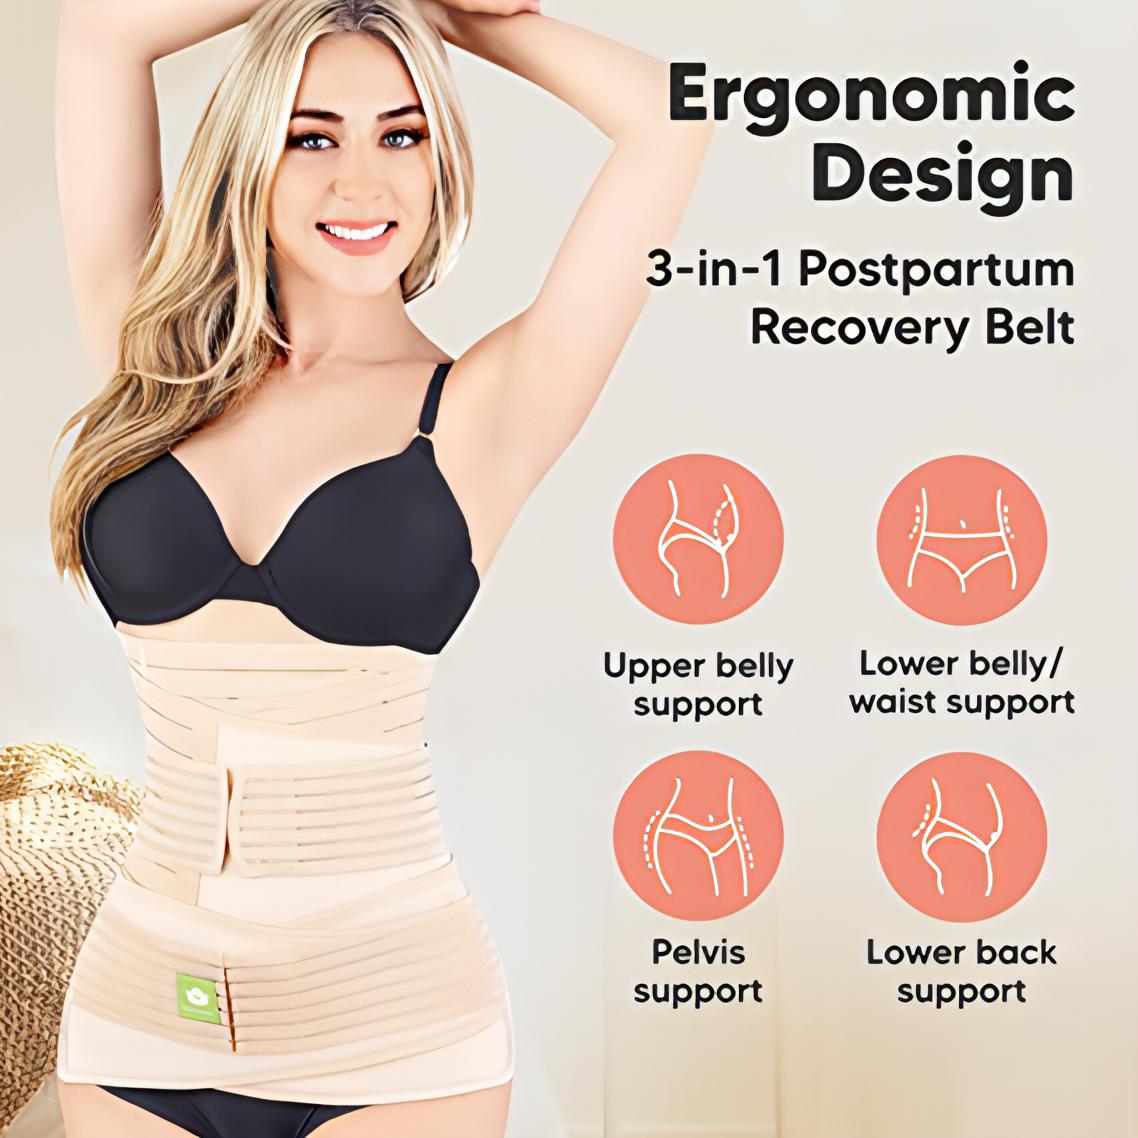 TopDeal Qatar - 3 In 1 Postpartum Recovery Belt for 79 QAR Buy now by  Comment or Inbox or WhatsApp :  Shop Online :  topdeal.qa Best Price